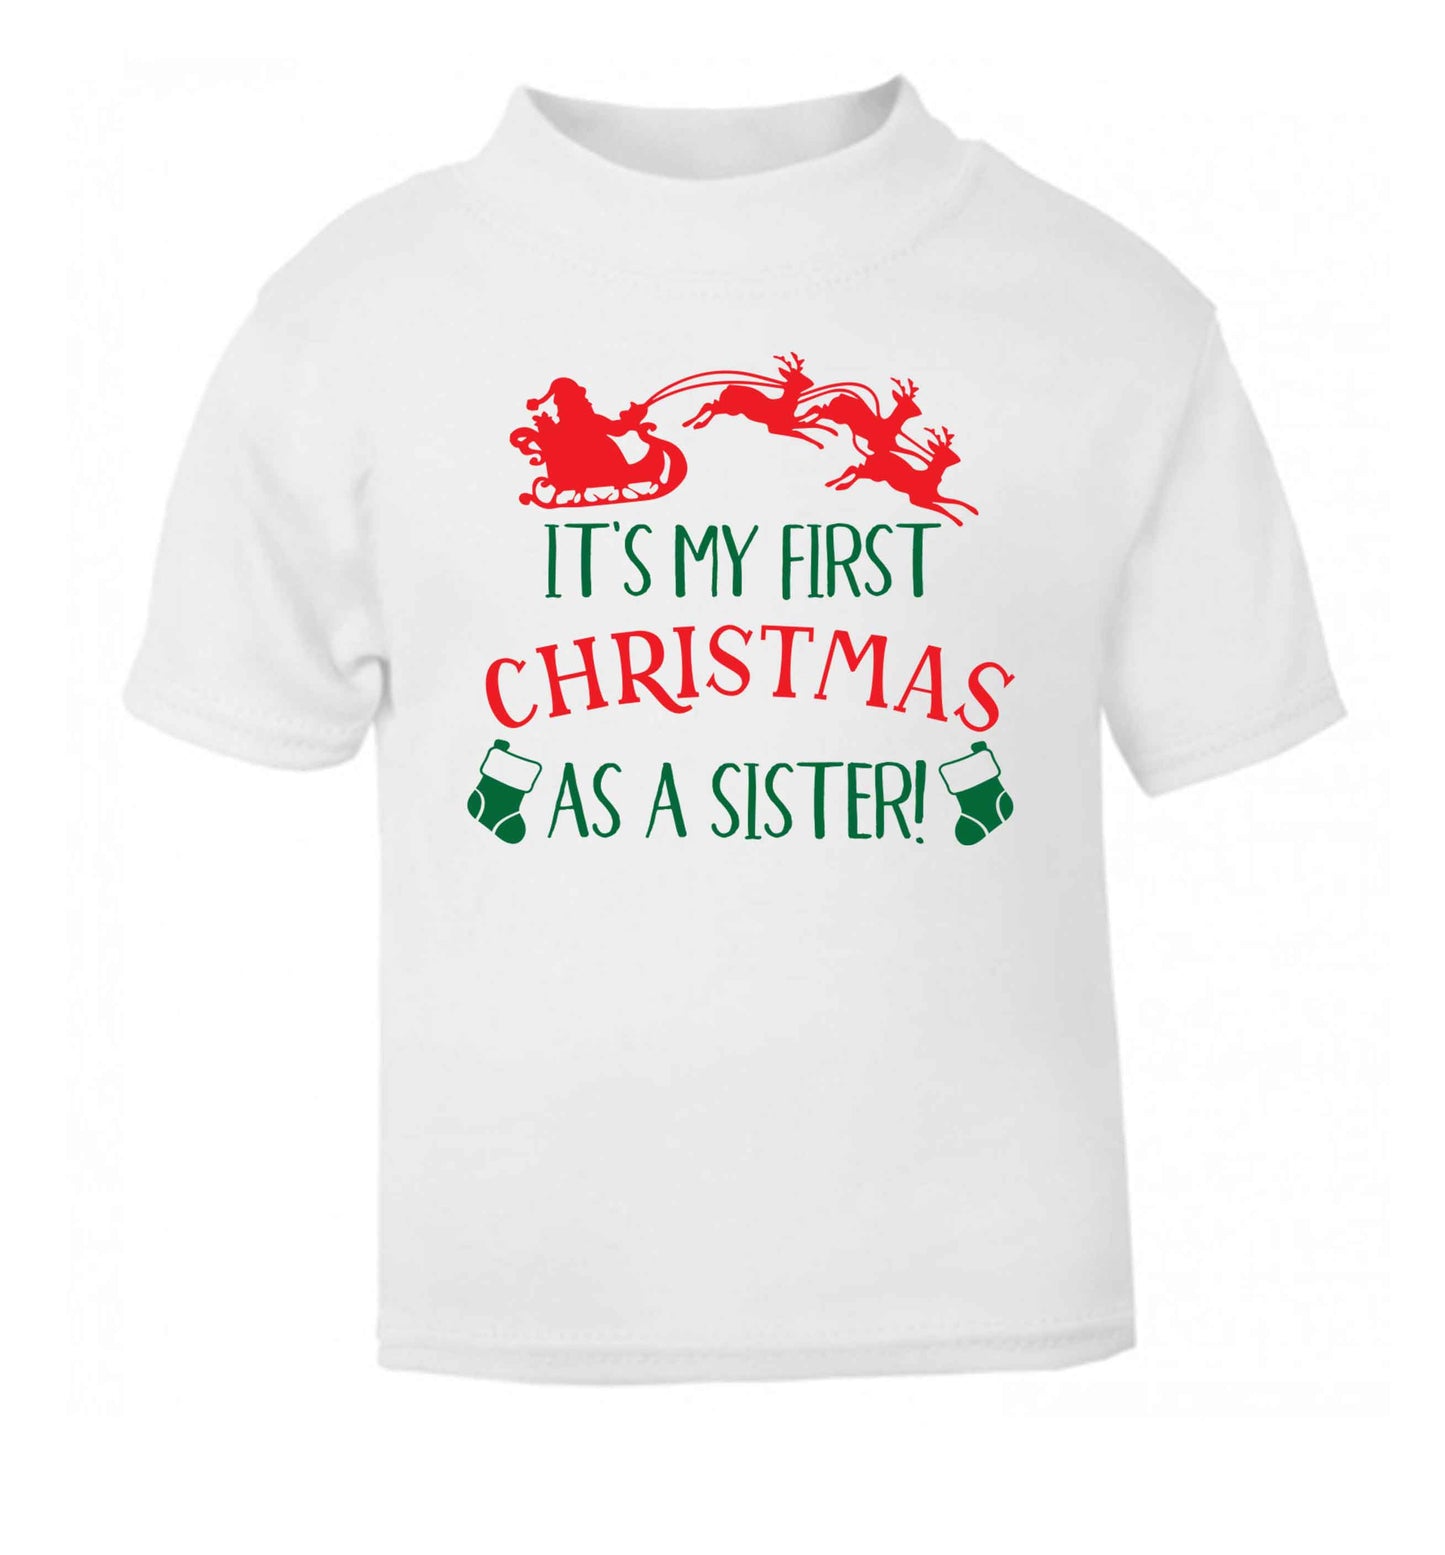 It's my first Christmas as a sister! white Baby Toddler Tshirt 2 Years